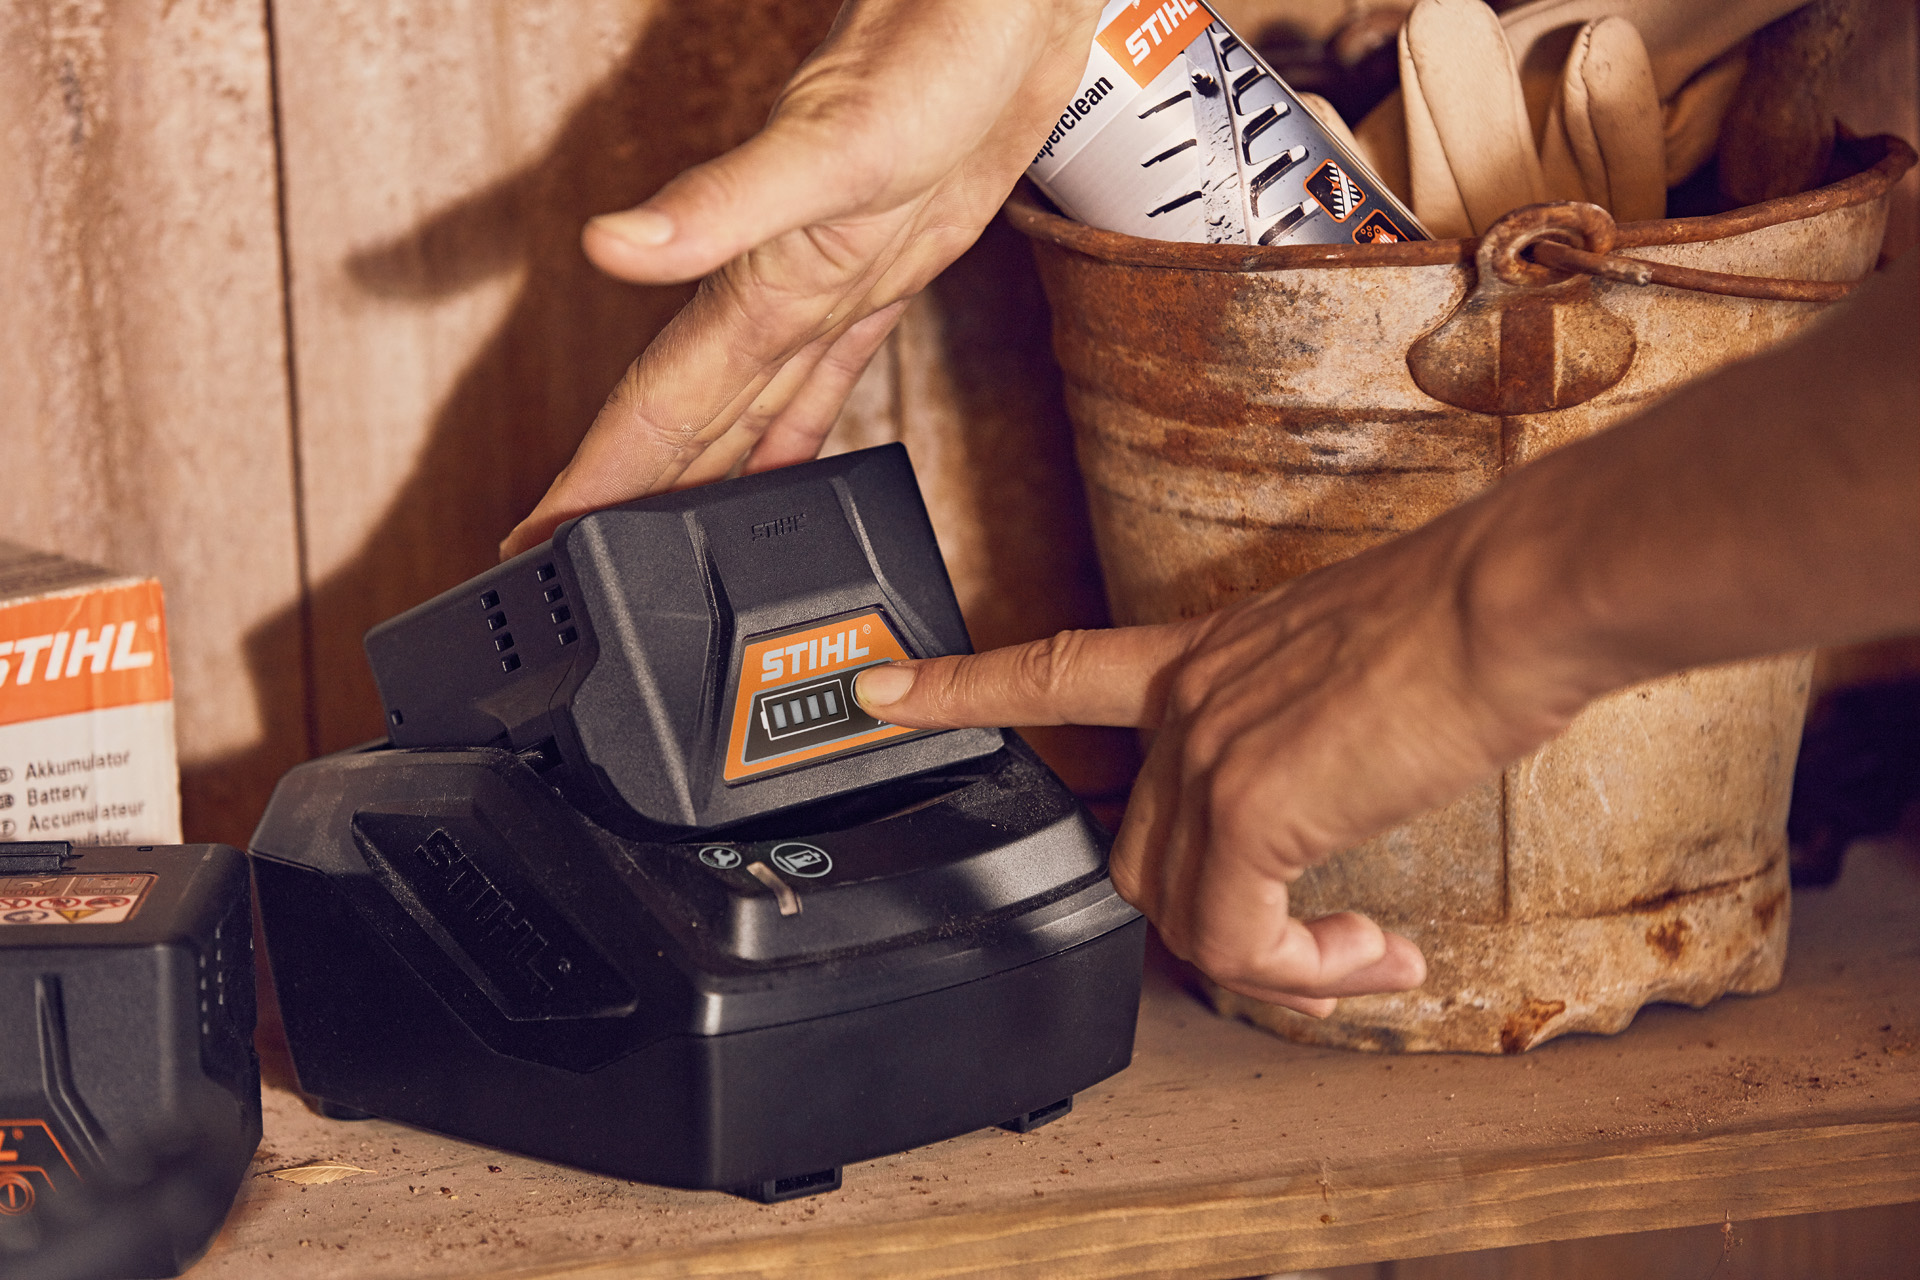 A STIHL AK 10 battery in a charger on a shelf, as someone checks the power level